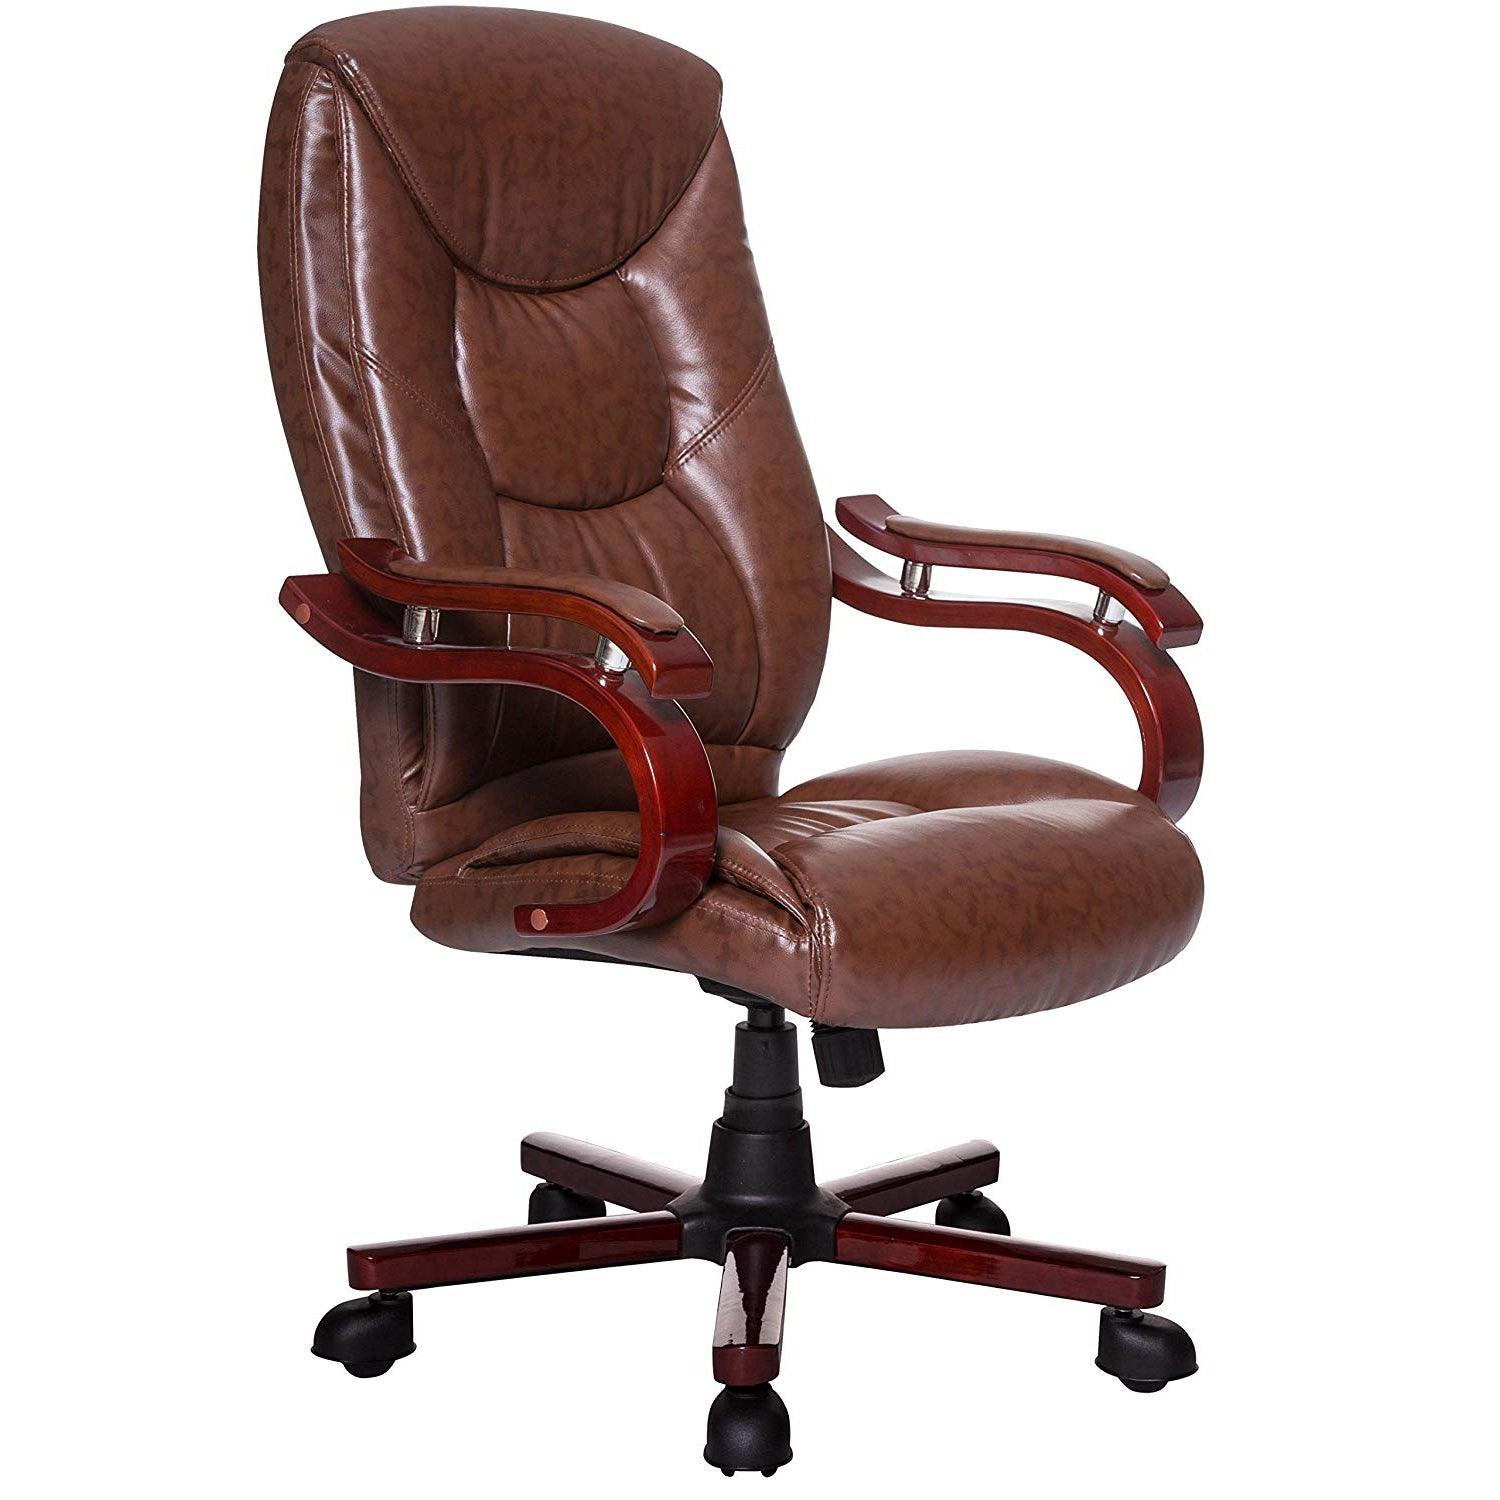 Luxury Wooden Frame Extra Padded Desk Computer Office Chair in Light B